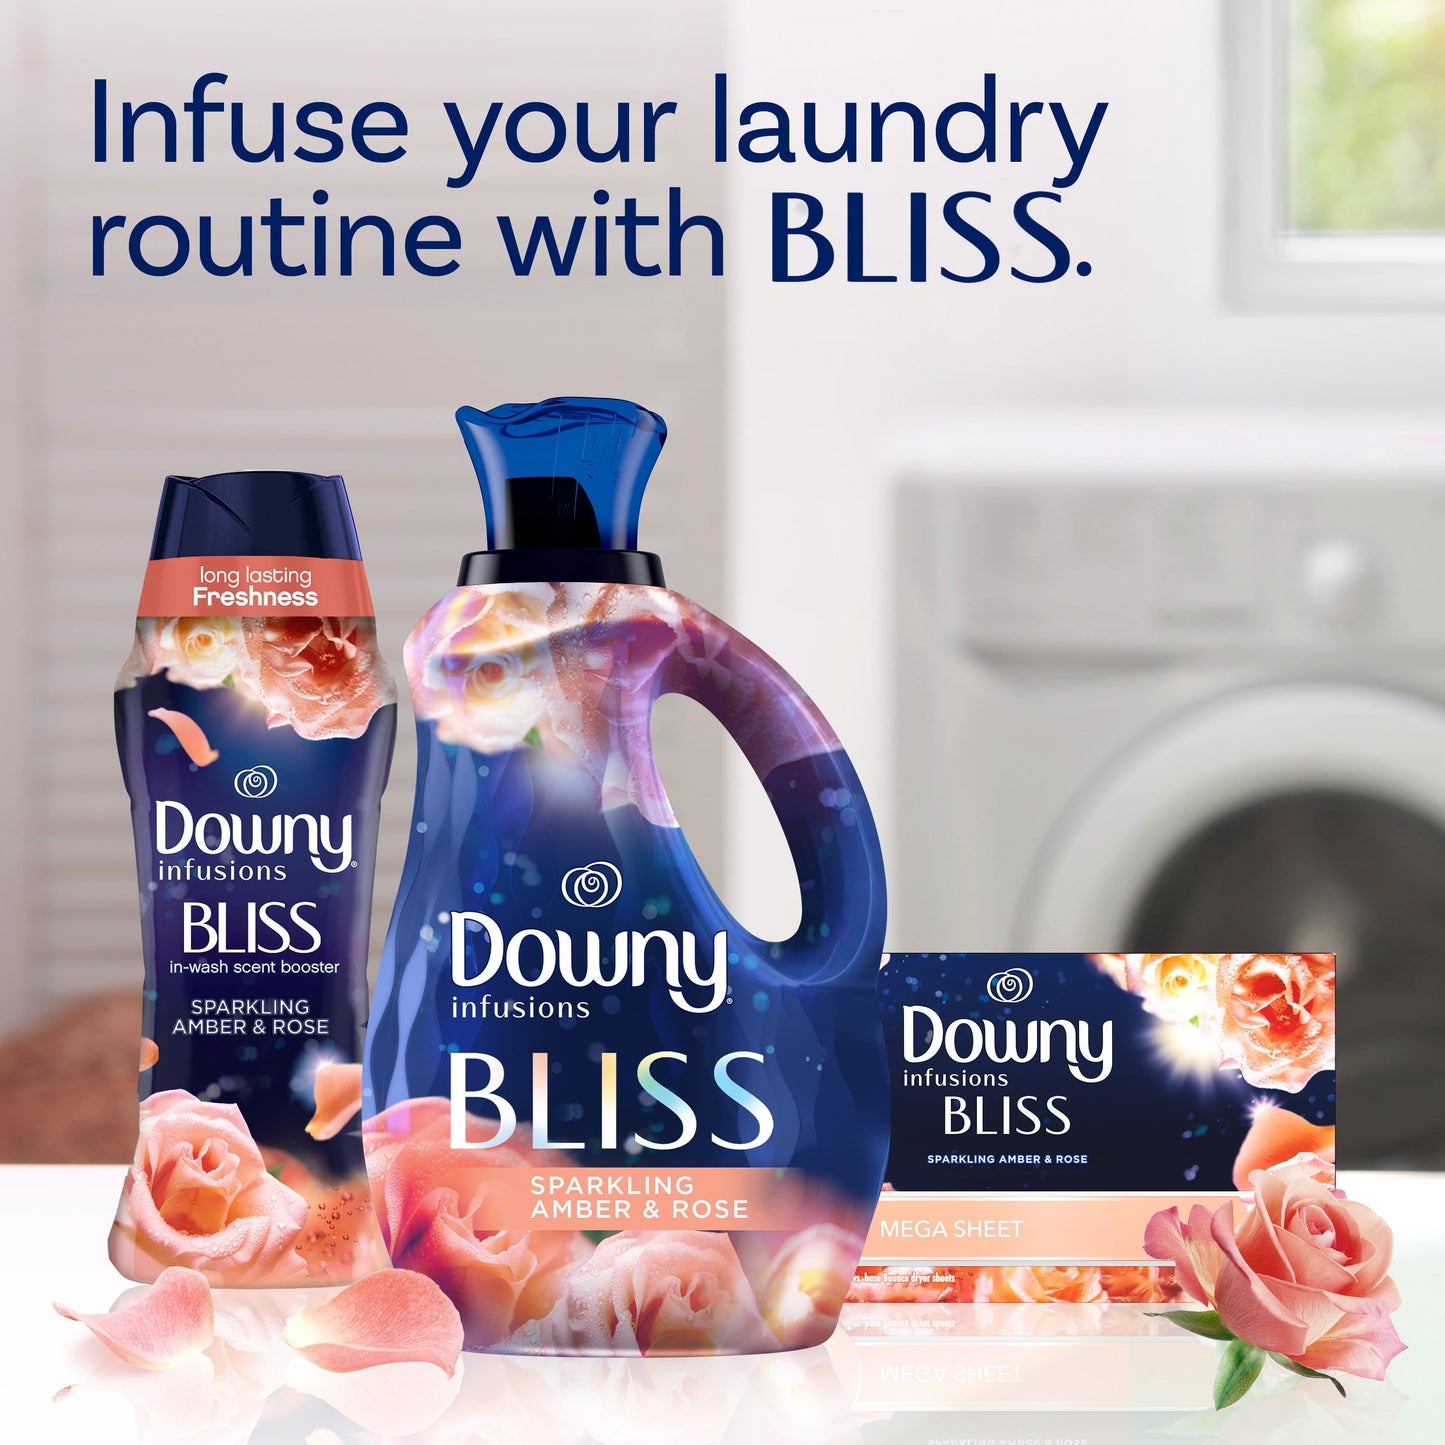 Downy Infusions Liquid Fabric Softener, Bliss, Sparkling Amber & Rose, 101 fl oz